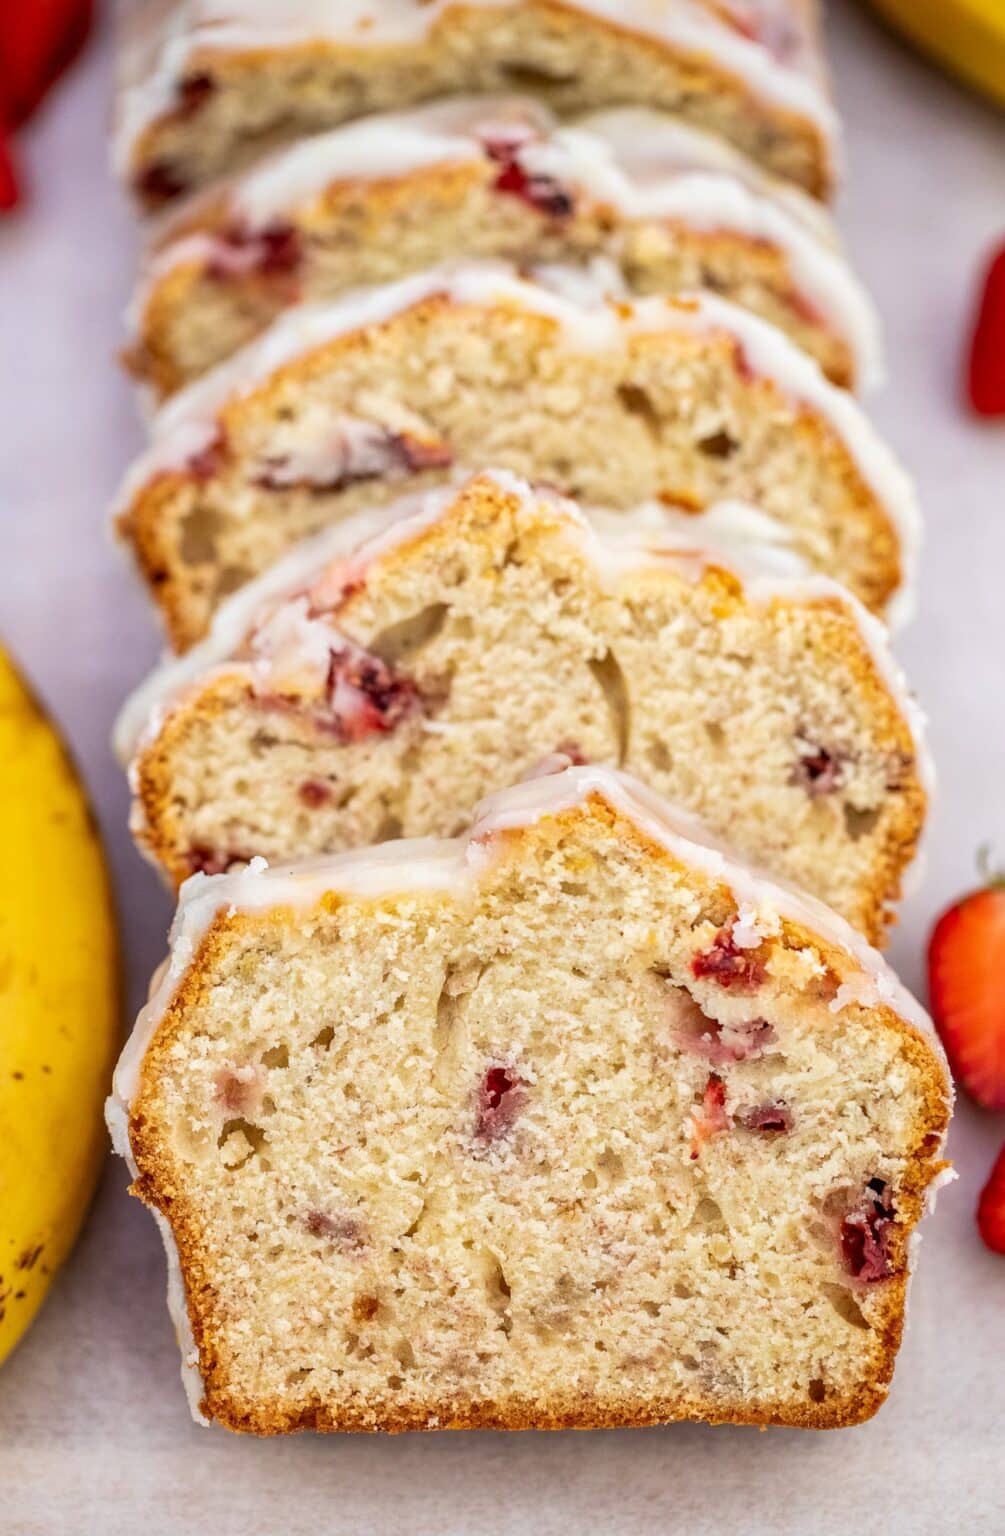 The Best Strawberry Banana Bread [video] - S&SM